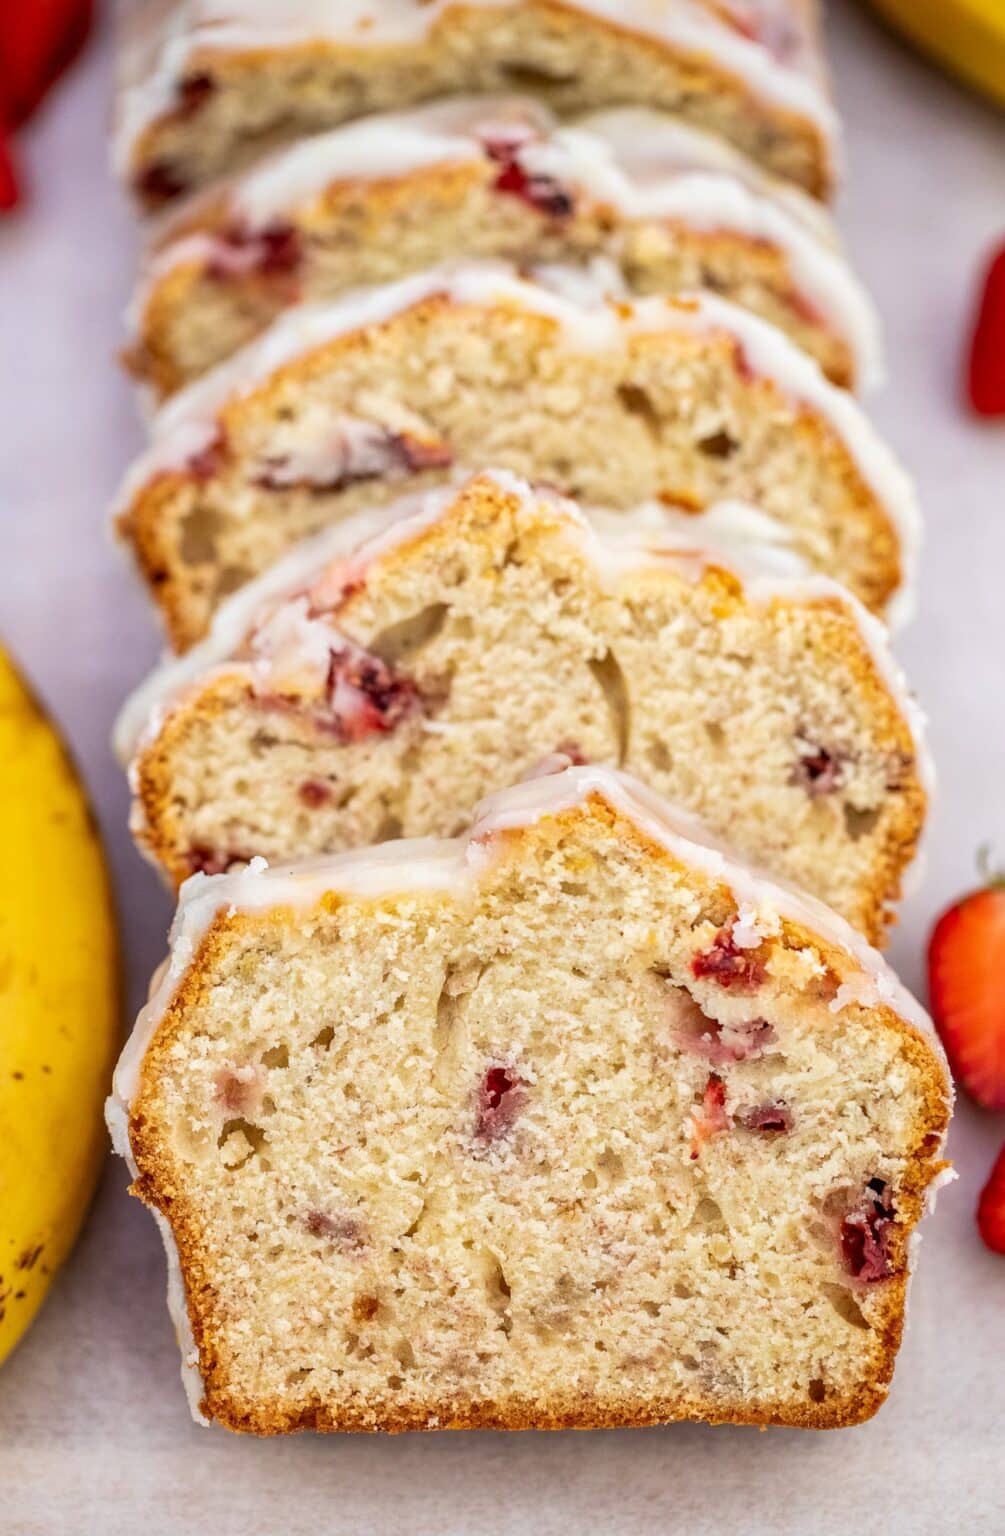 The Best Strawberry Banana Bread [video] - S&SM